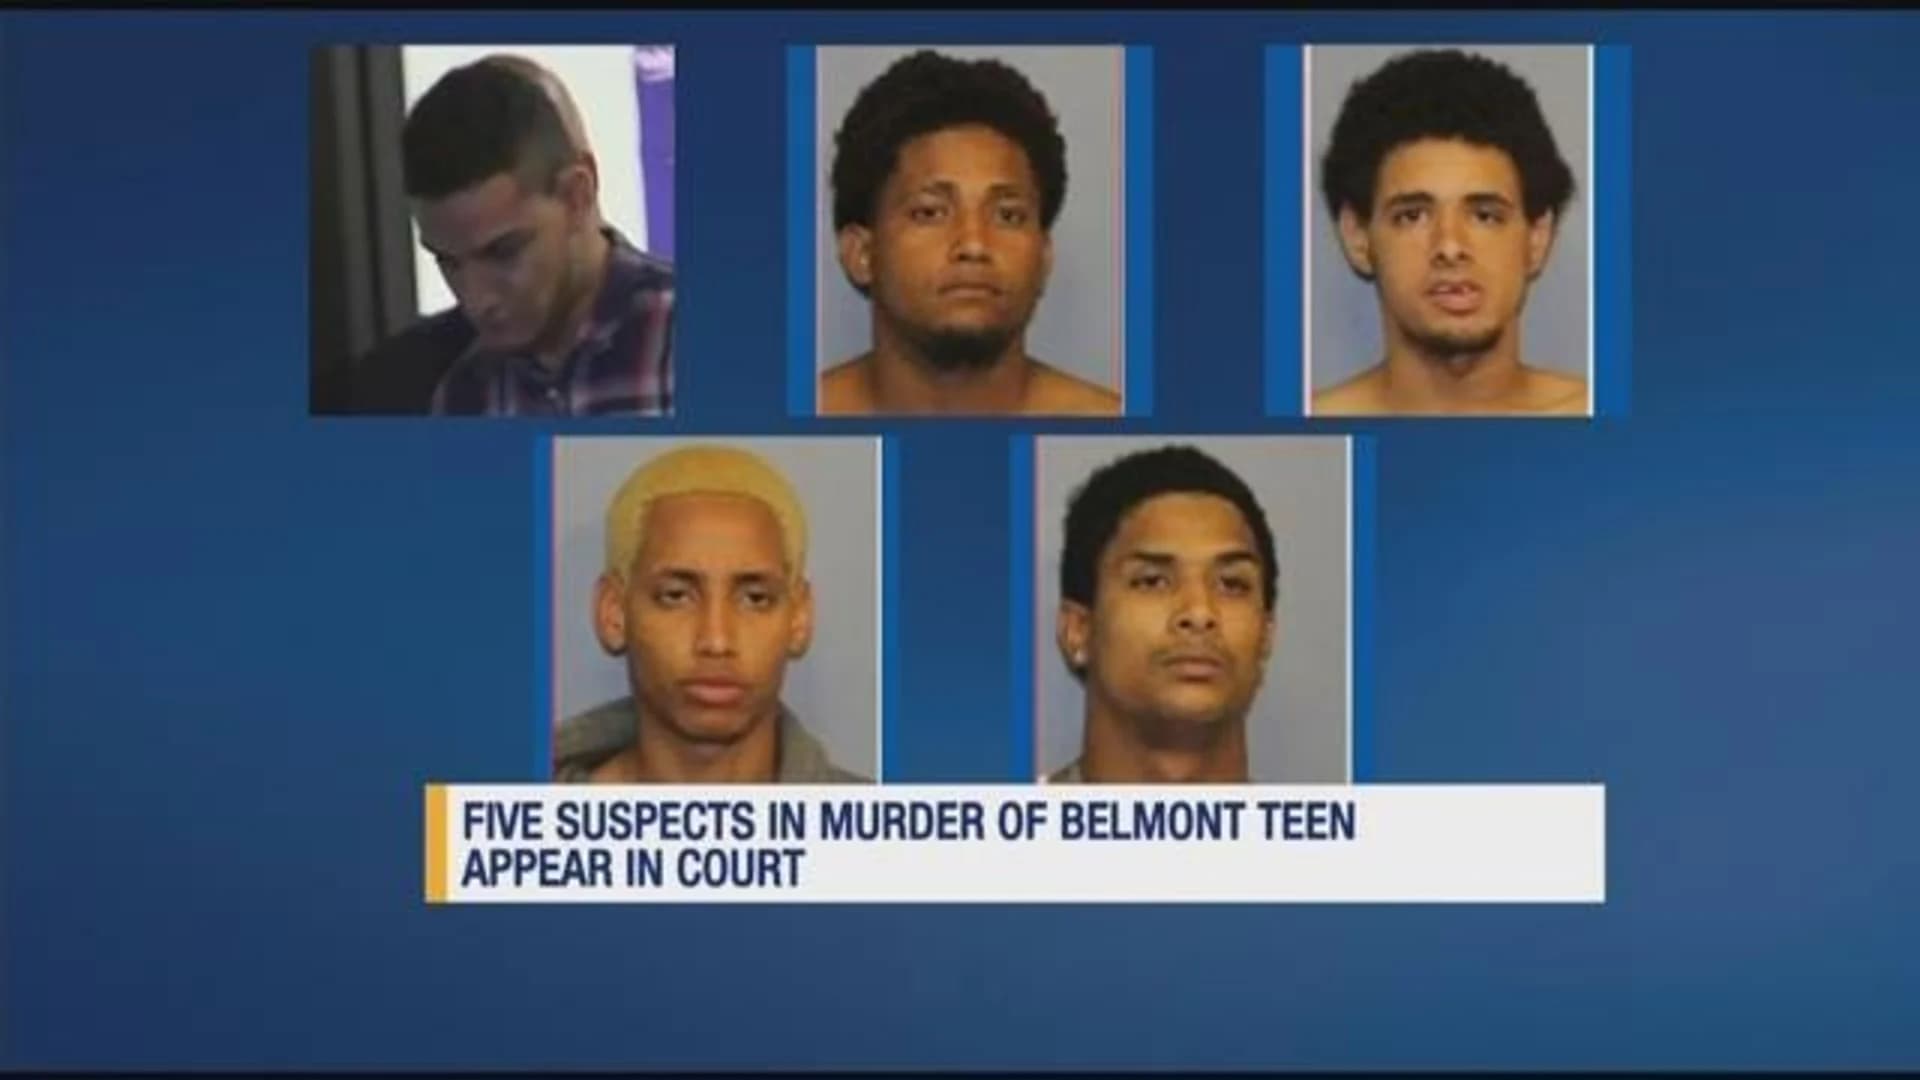 5 suspects face judge for pretrial hearing in Junior slaying case